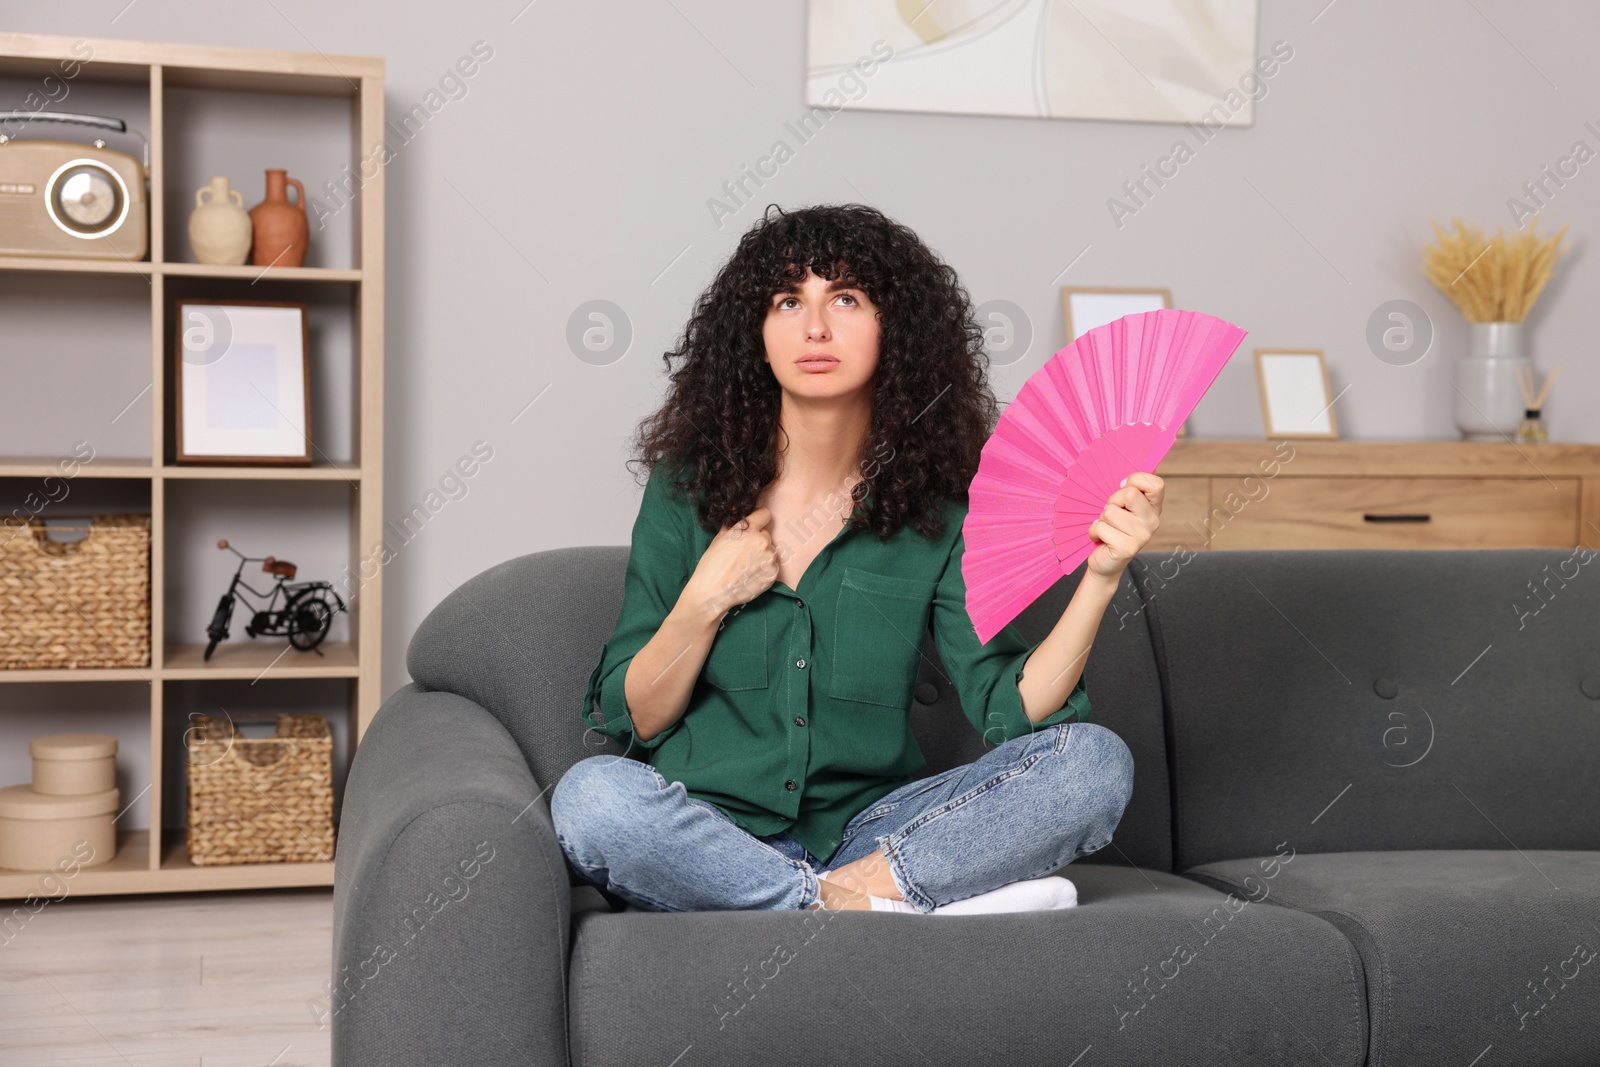 Photo of Young woman waving pink hand fan to cool herself on sofa at home